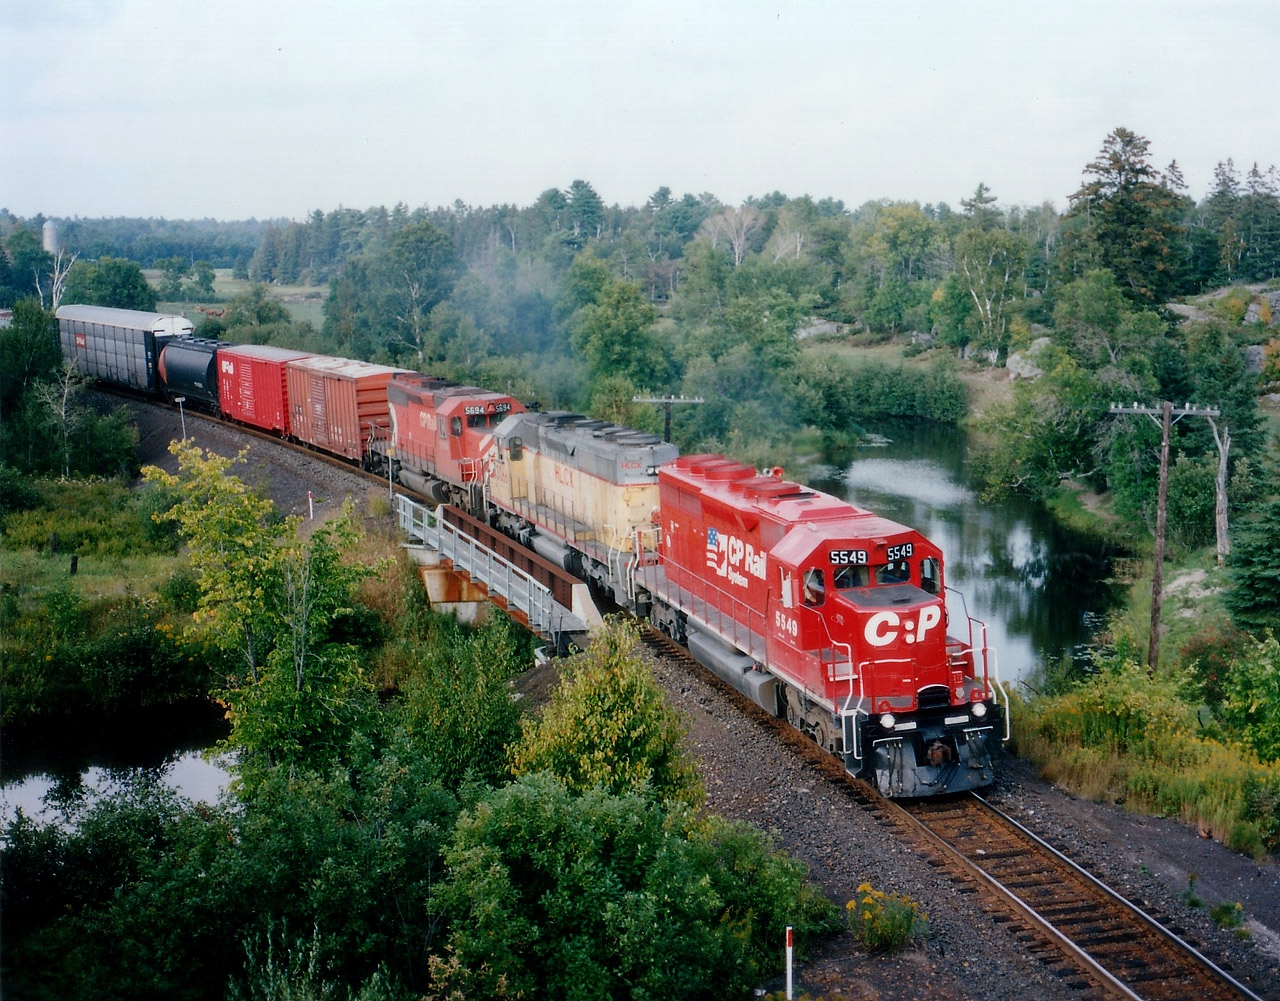 CP 5549, HLCX 3066 and CP 5694 make up the power on this days' Winnipeg-Toronto train #474 as it is about to duck under Hwy 69 on its way into Britt. The HLCX was a former UP, same number. The Still River looks rather peaceful in this photo. Dry summer, I guess.